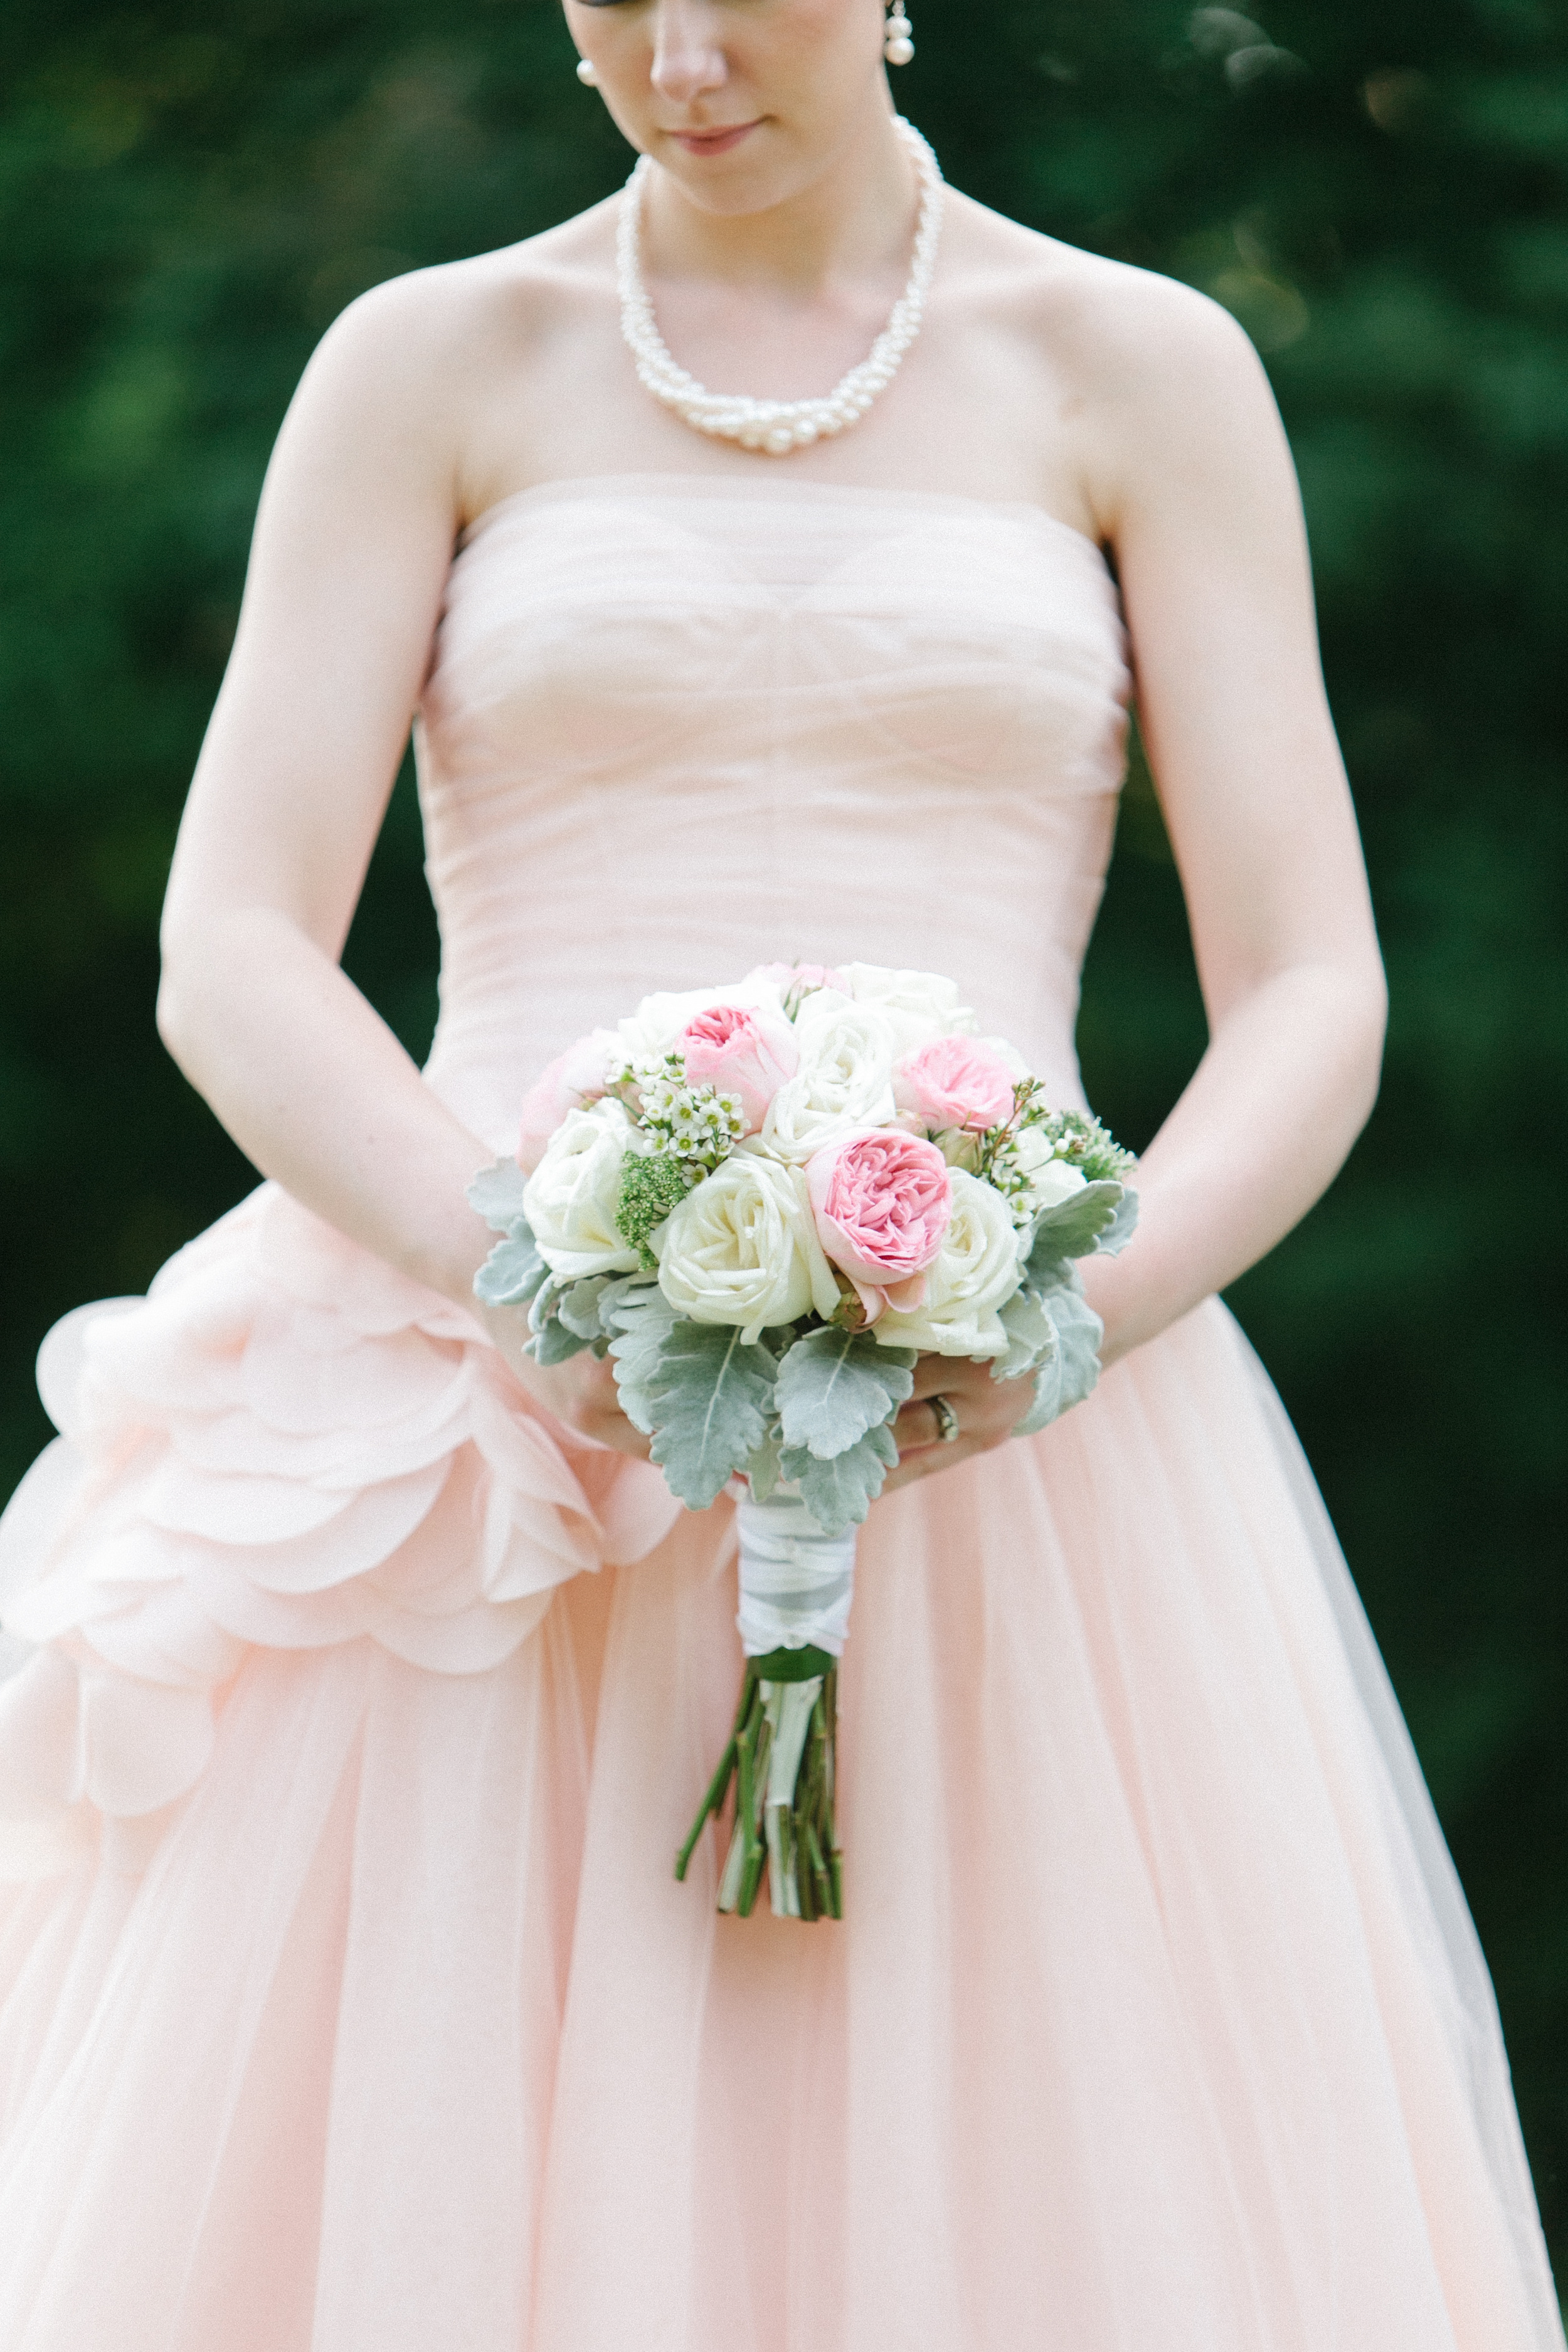  Pretty Pink and White Wedding Bouquet with Bride in Pink Vera Wang Gown | photo by blf Studios | flowers by Norwood Florist | wedding by Madeline's Weddings 